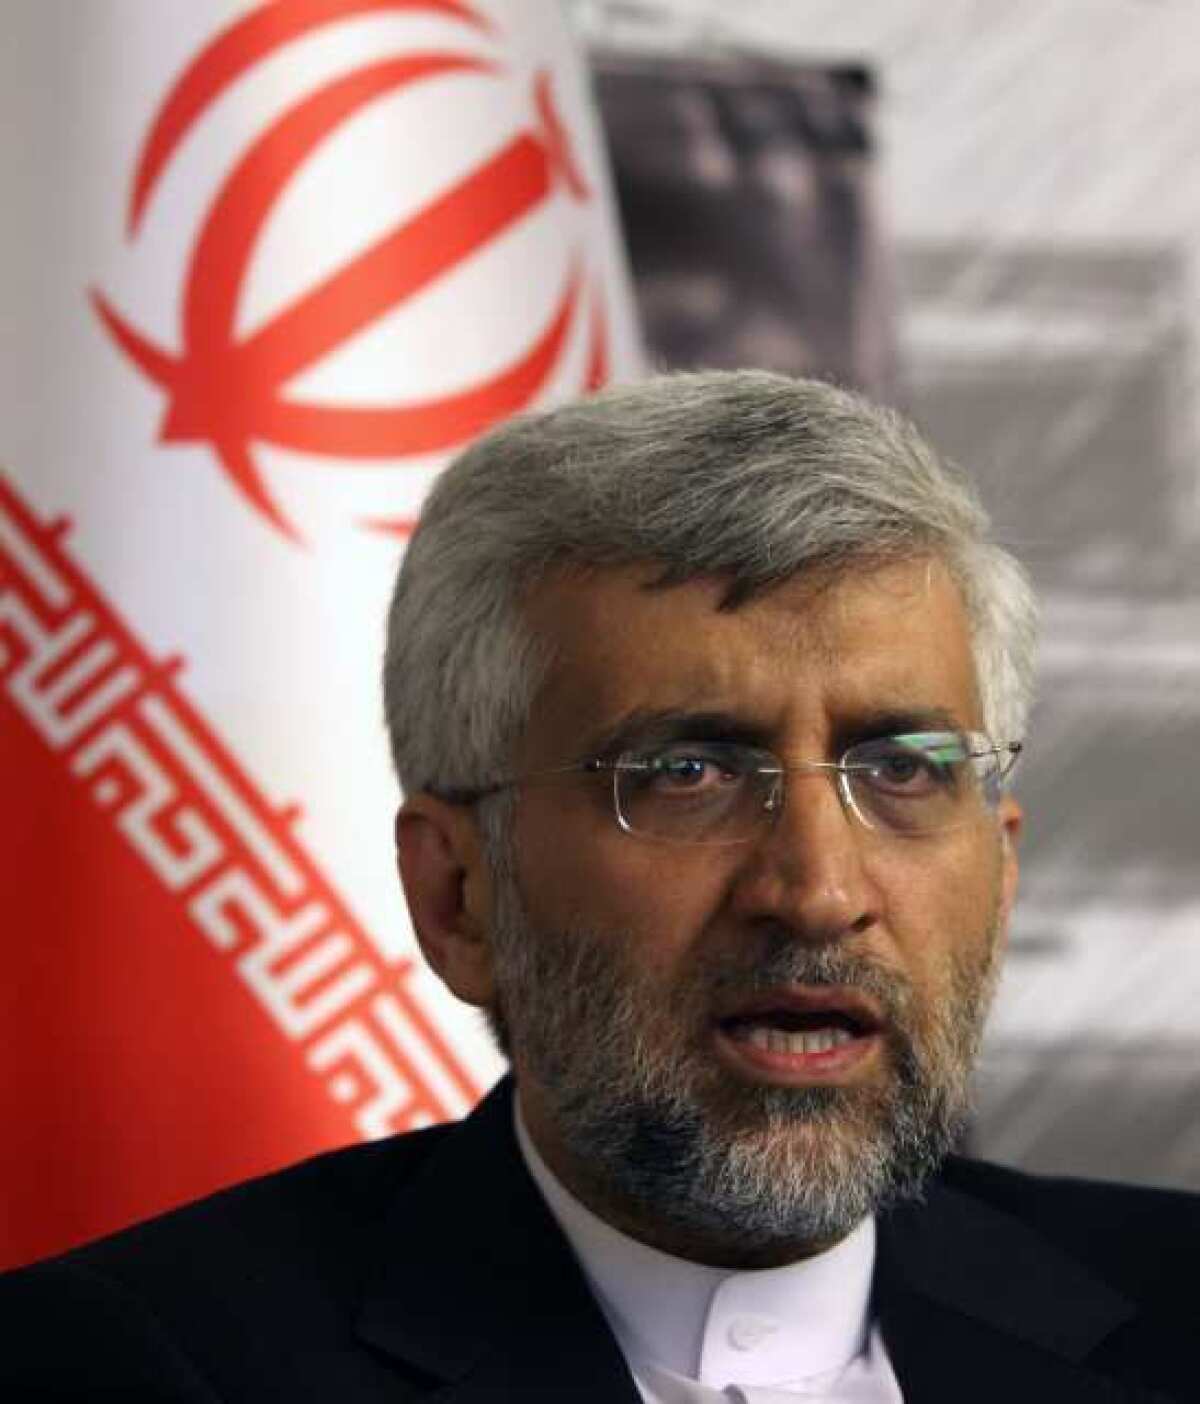 Iran's Chief Nuclear Negotiator Saeed Jalili speaks to The Associated Press after day-long talks with six world powers in Istanbul, Turkey.